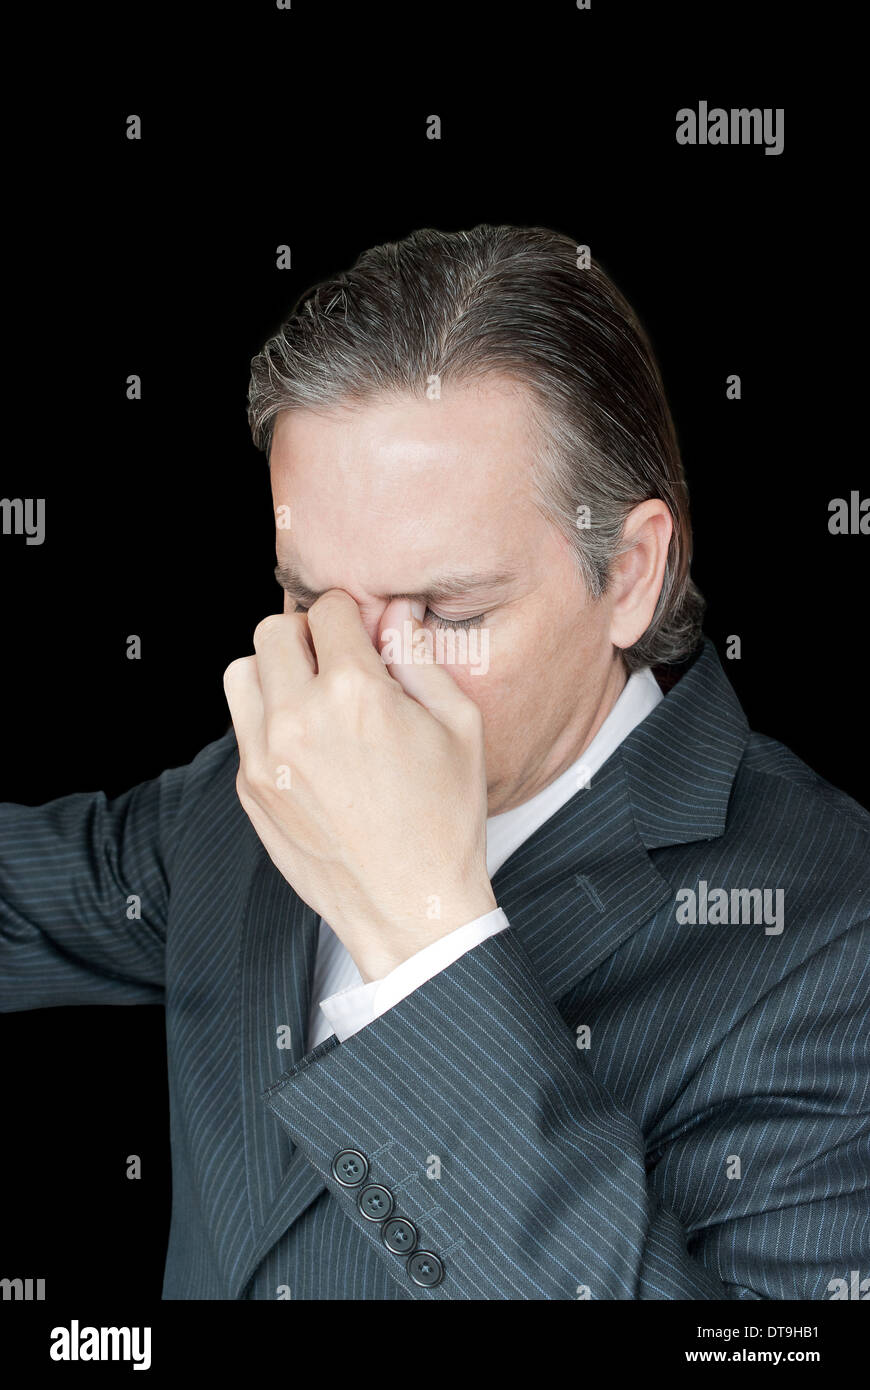 Close-up of a stressed businessman, front view. Stock Photo